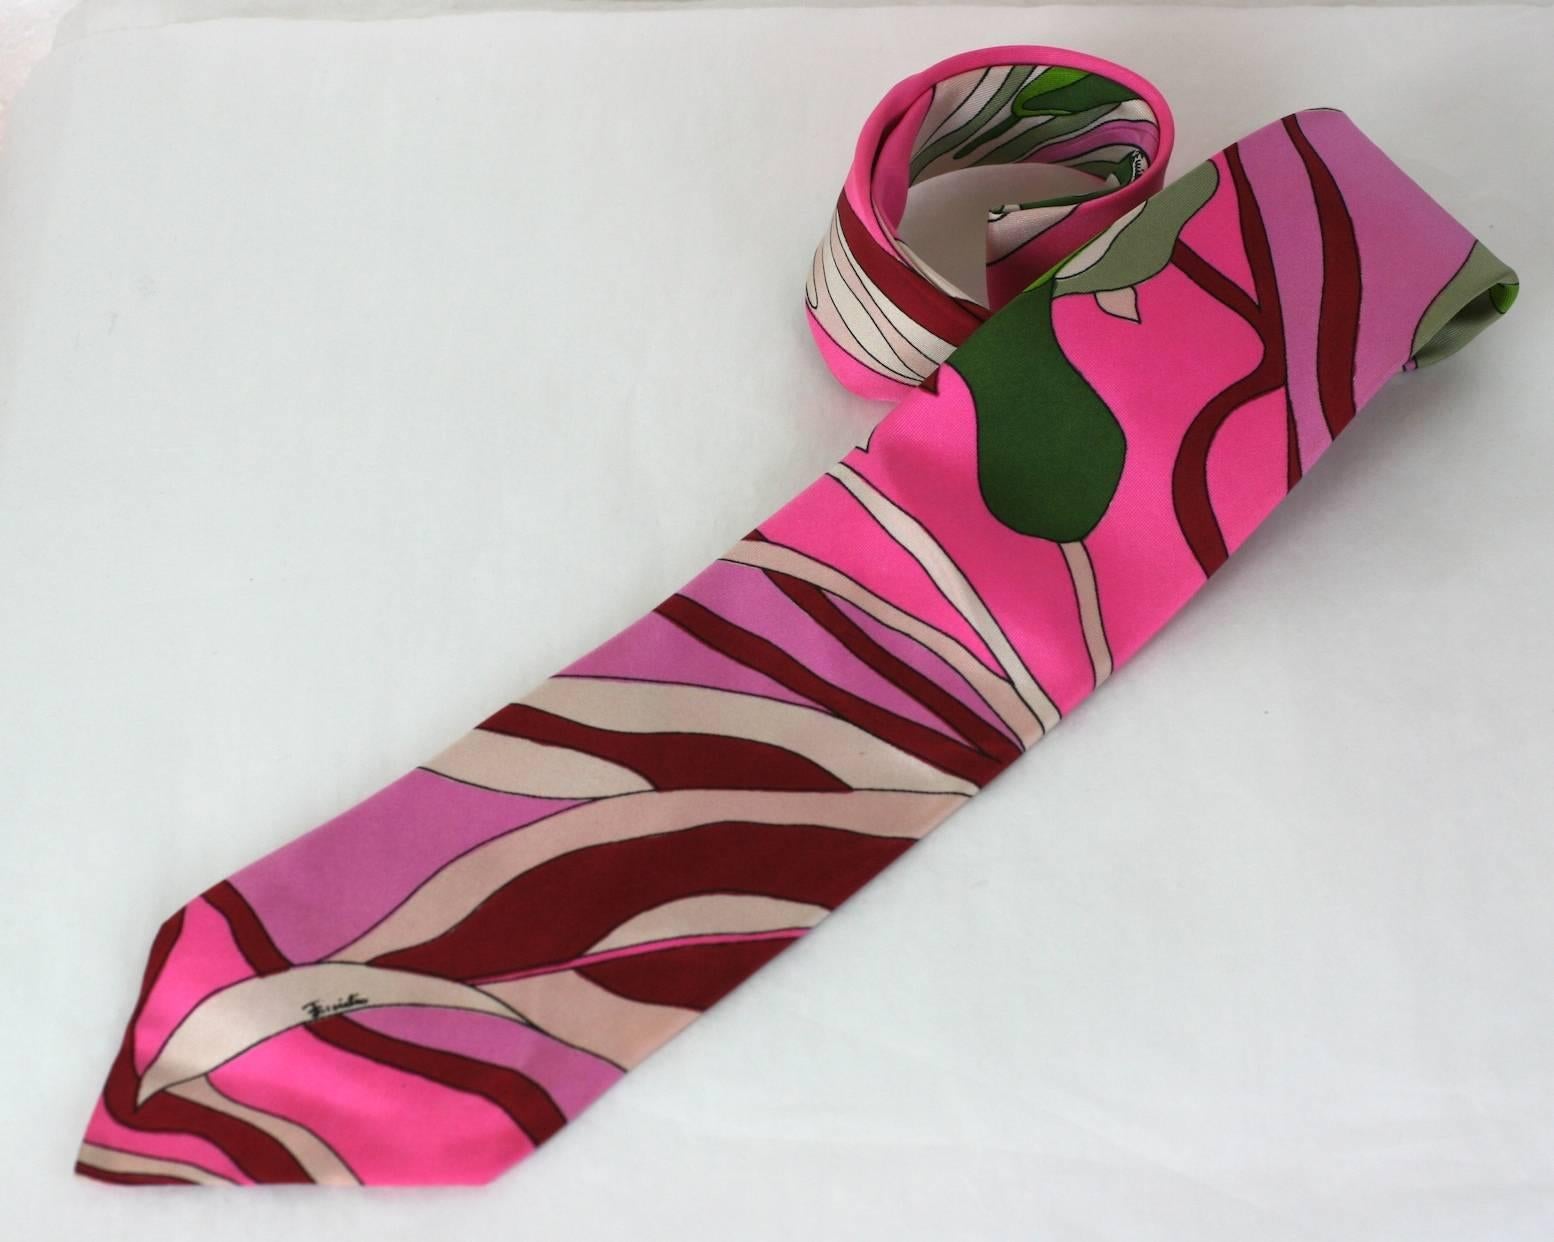 Emilio Pucci signature printed silk twill mens necktie, boldly printed floral motif in shades of fuschia pink, mauves and olive greens. The fabric signed 